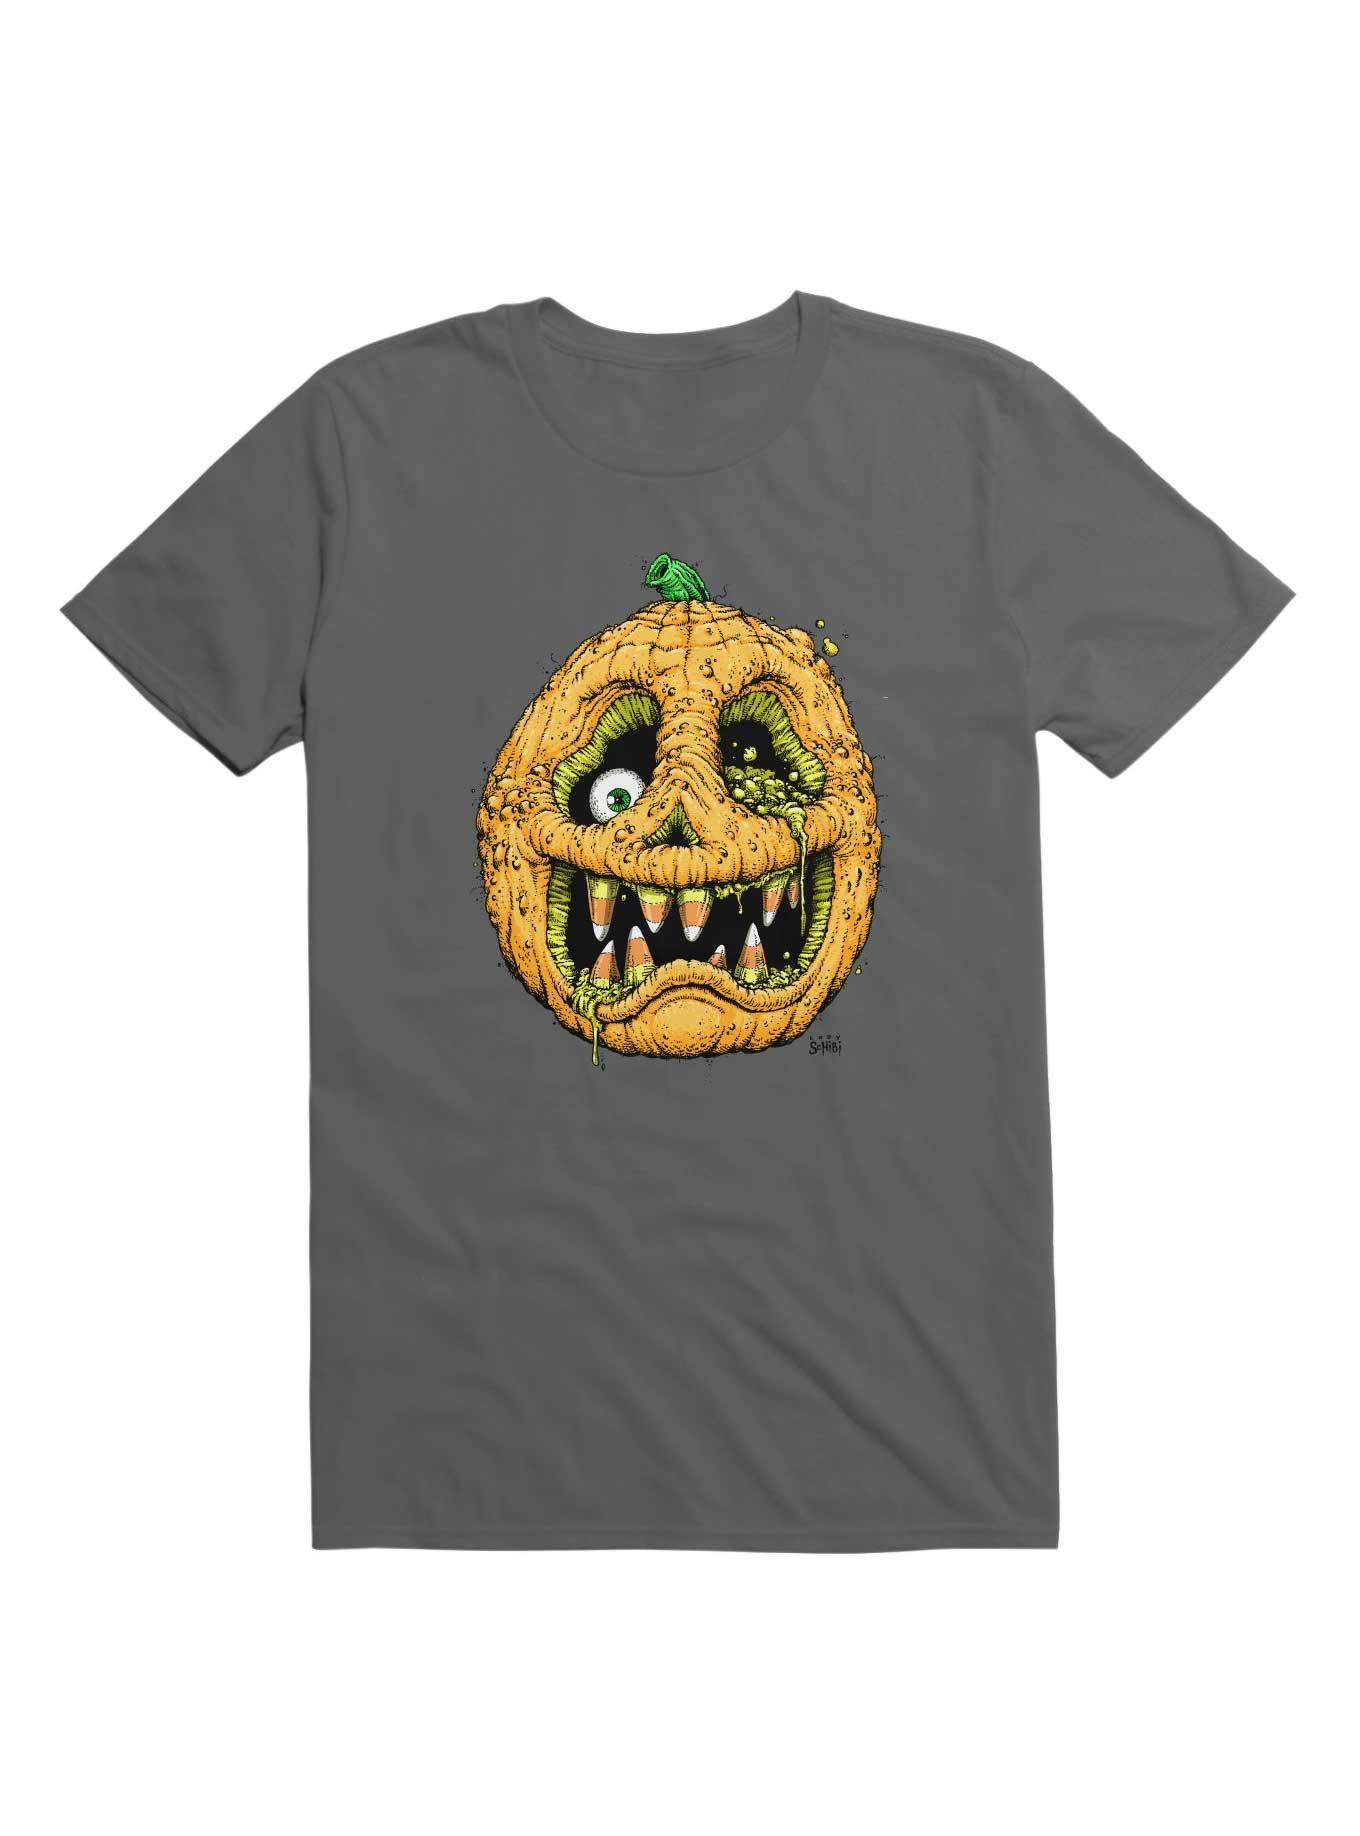 The Old Gourd T-Shirt